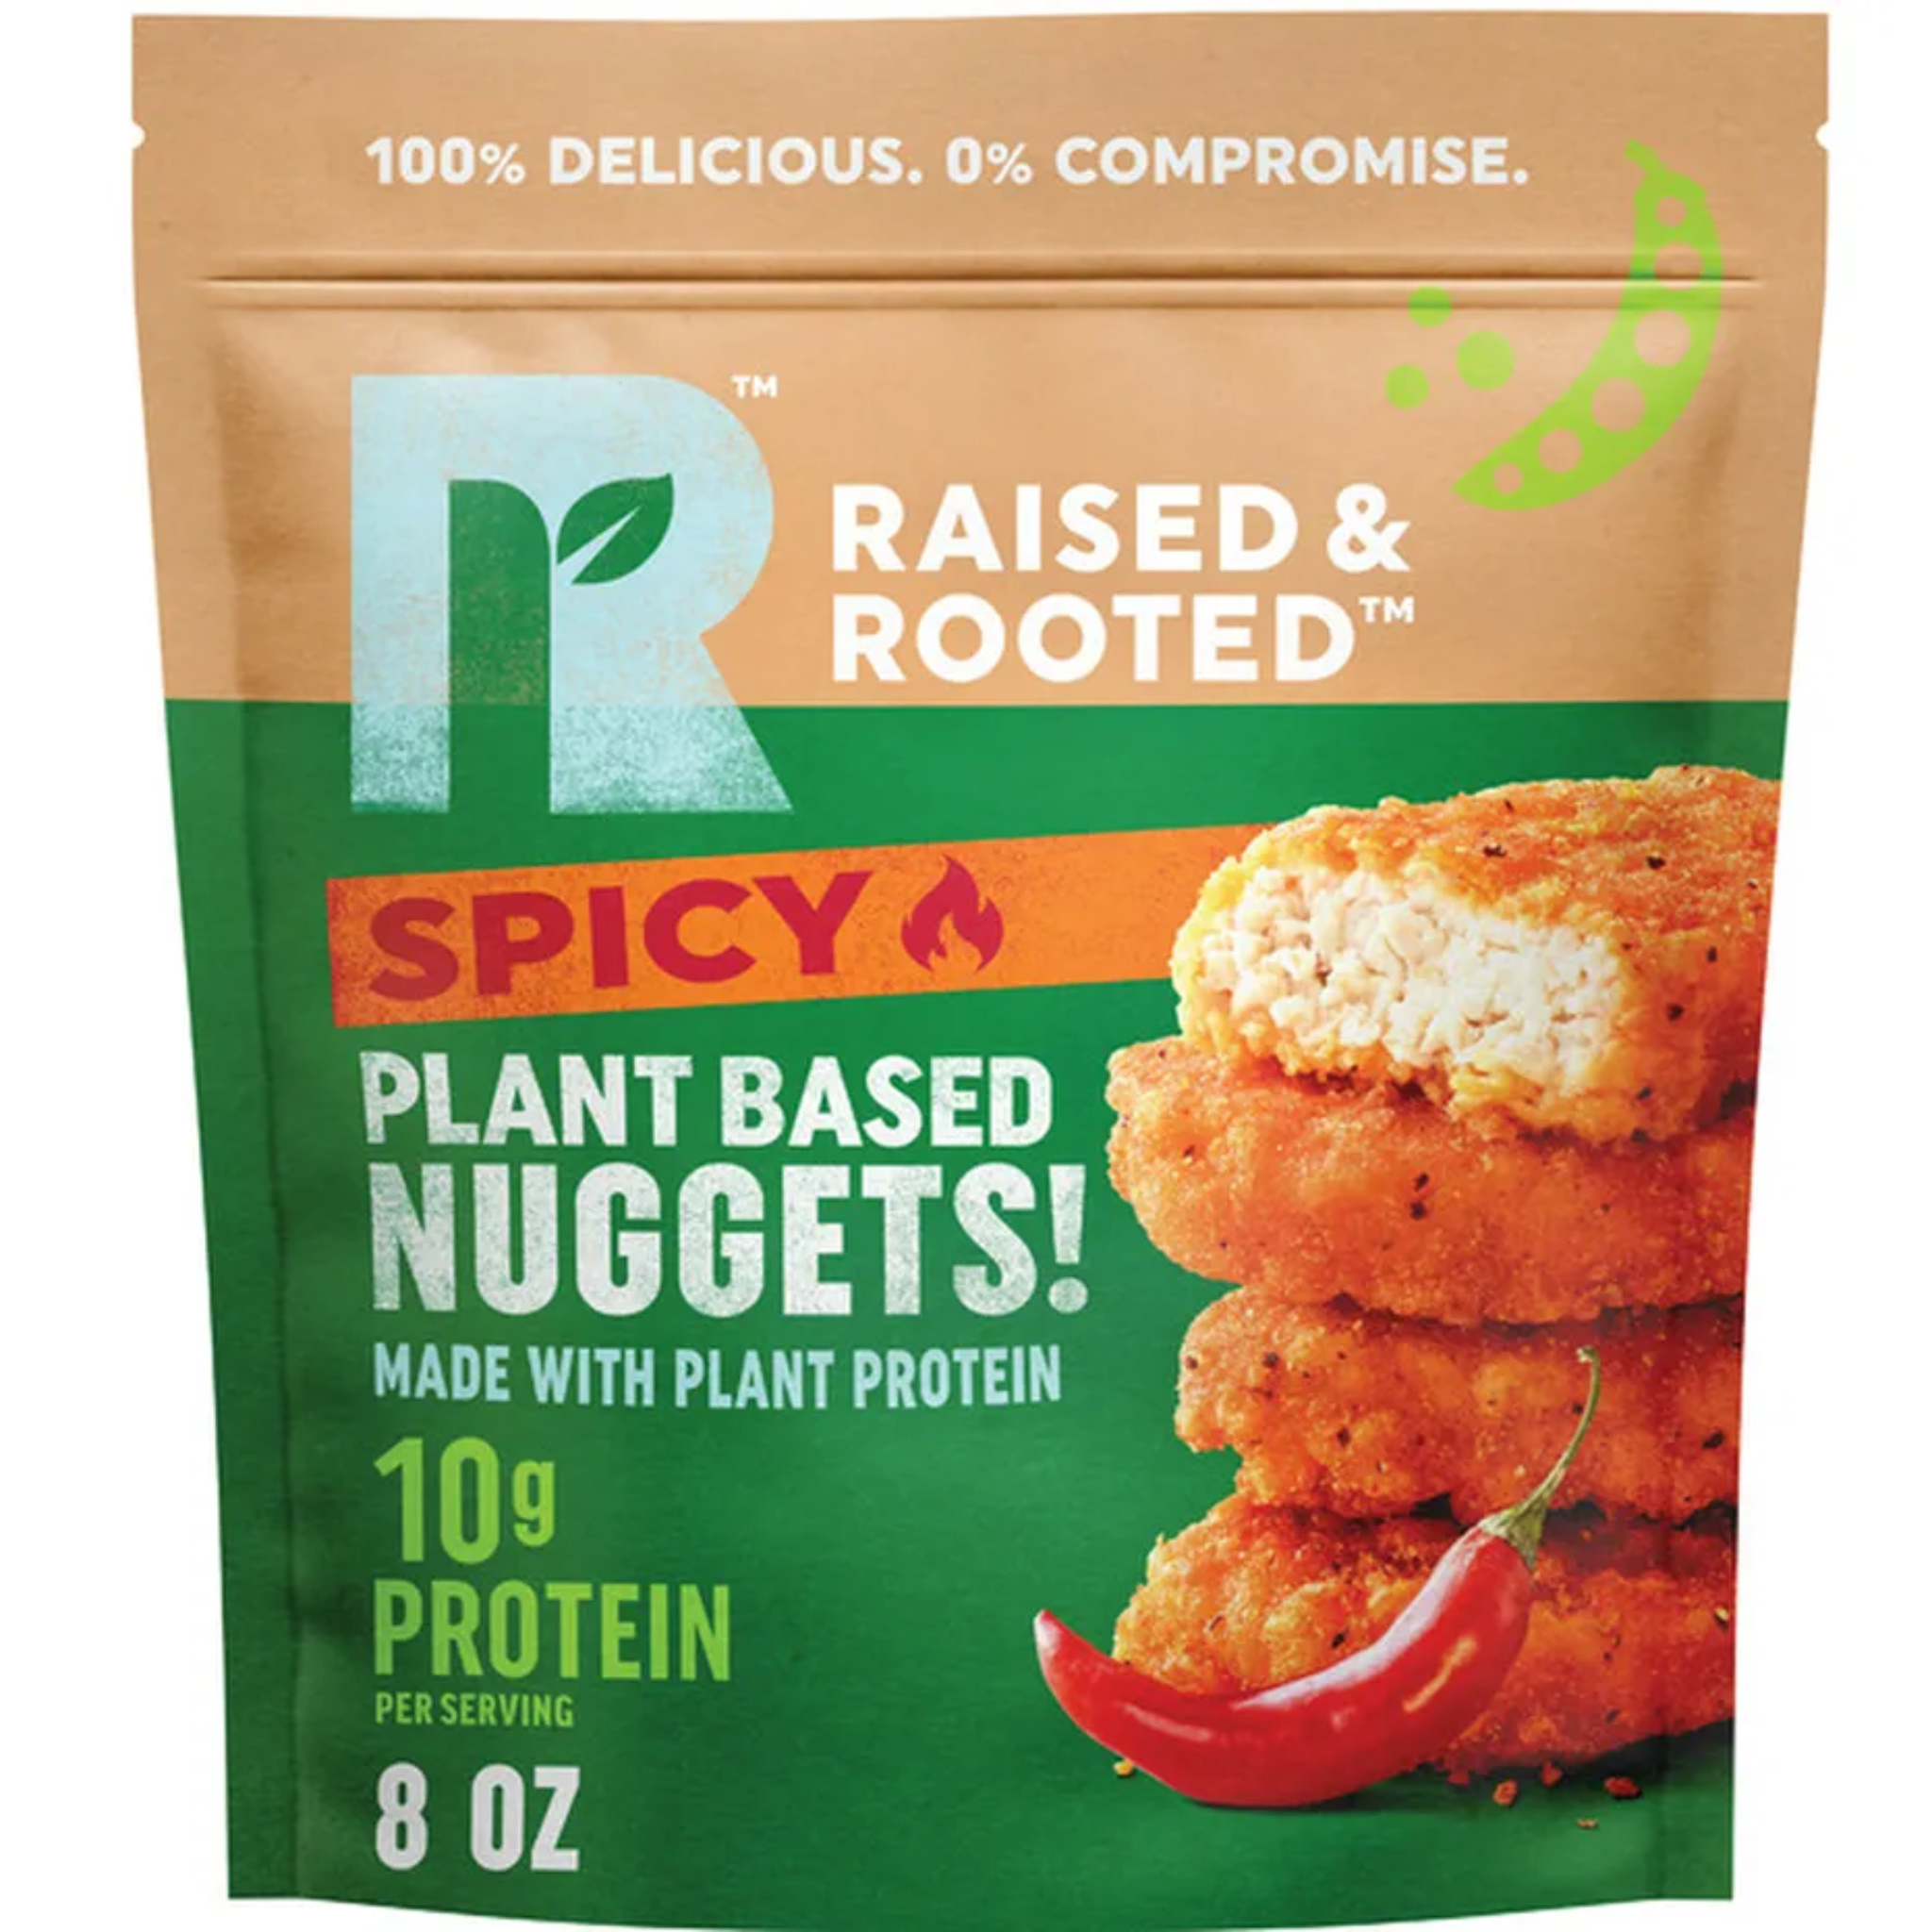 Raised & Rooted Spicy Plant Based Chicken Nuggets